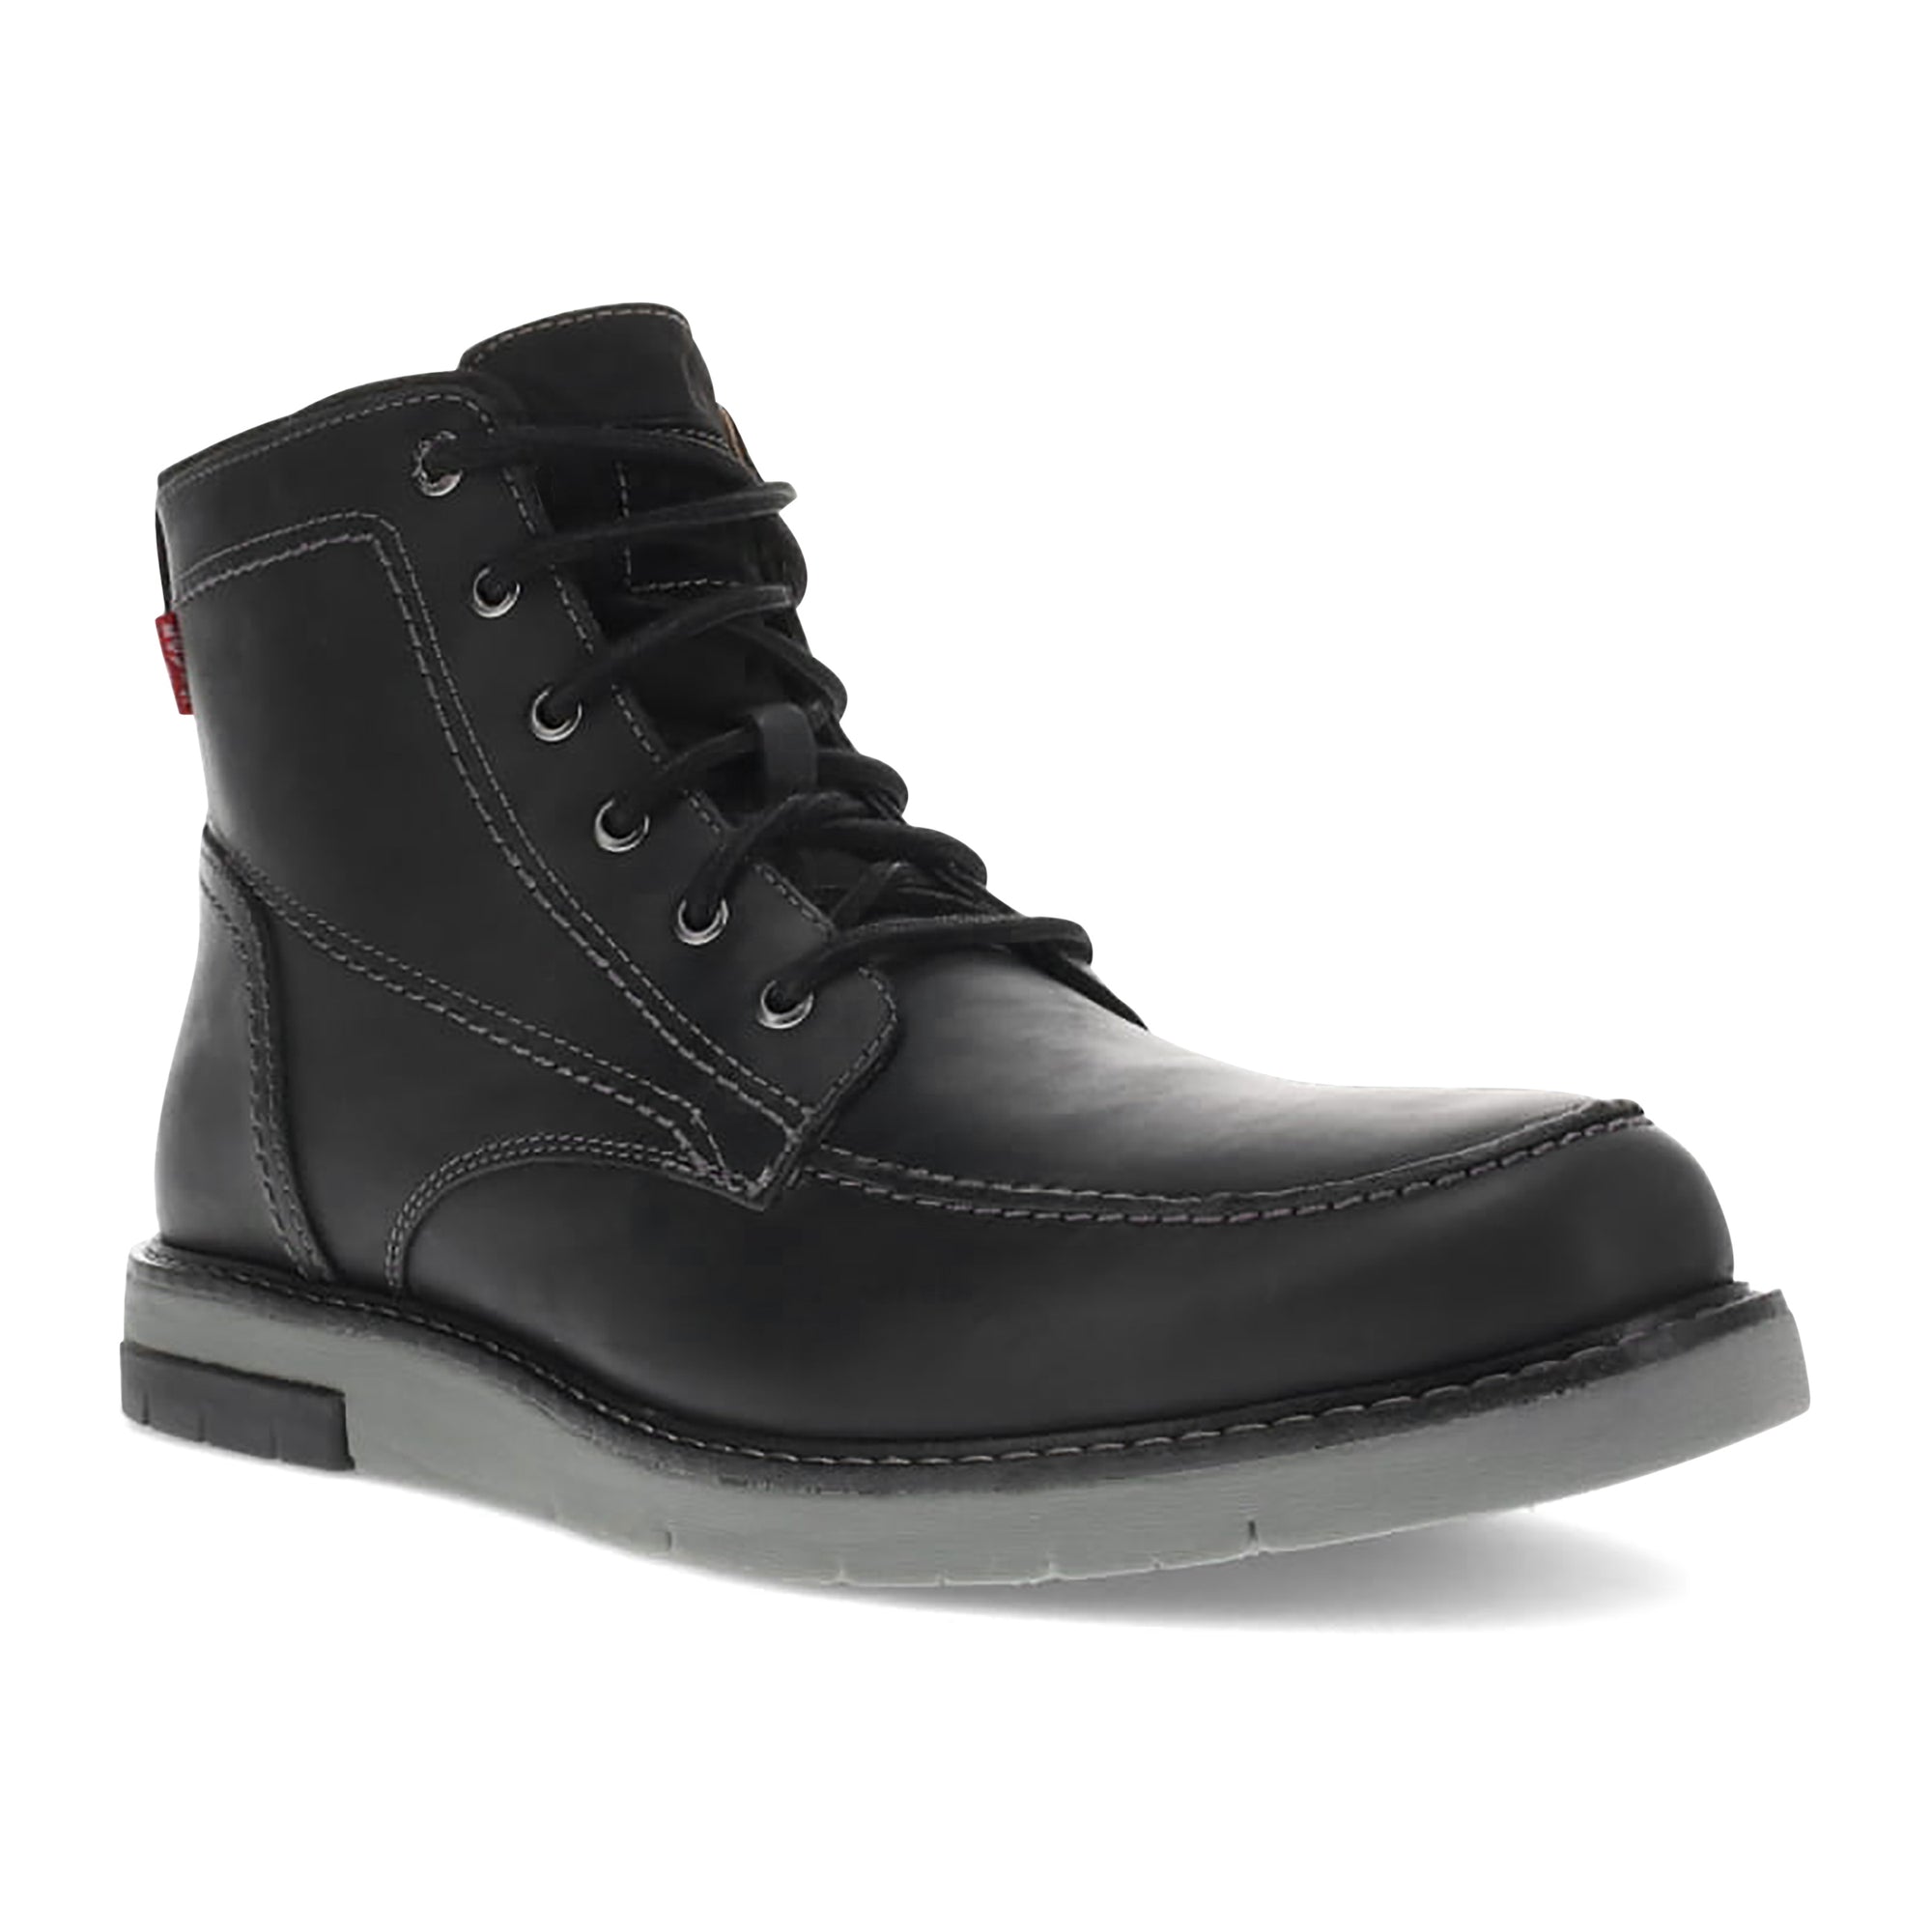 Black-Levi's Mens Daleside Leather Rugged Casual Comfort Hiker Chukka Ankle Boot